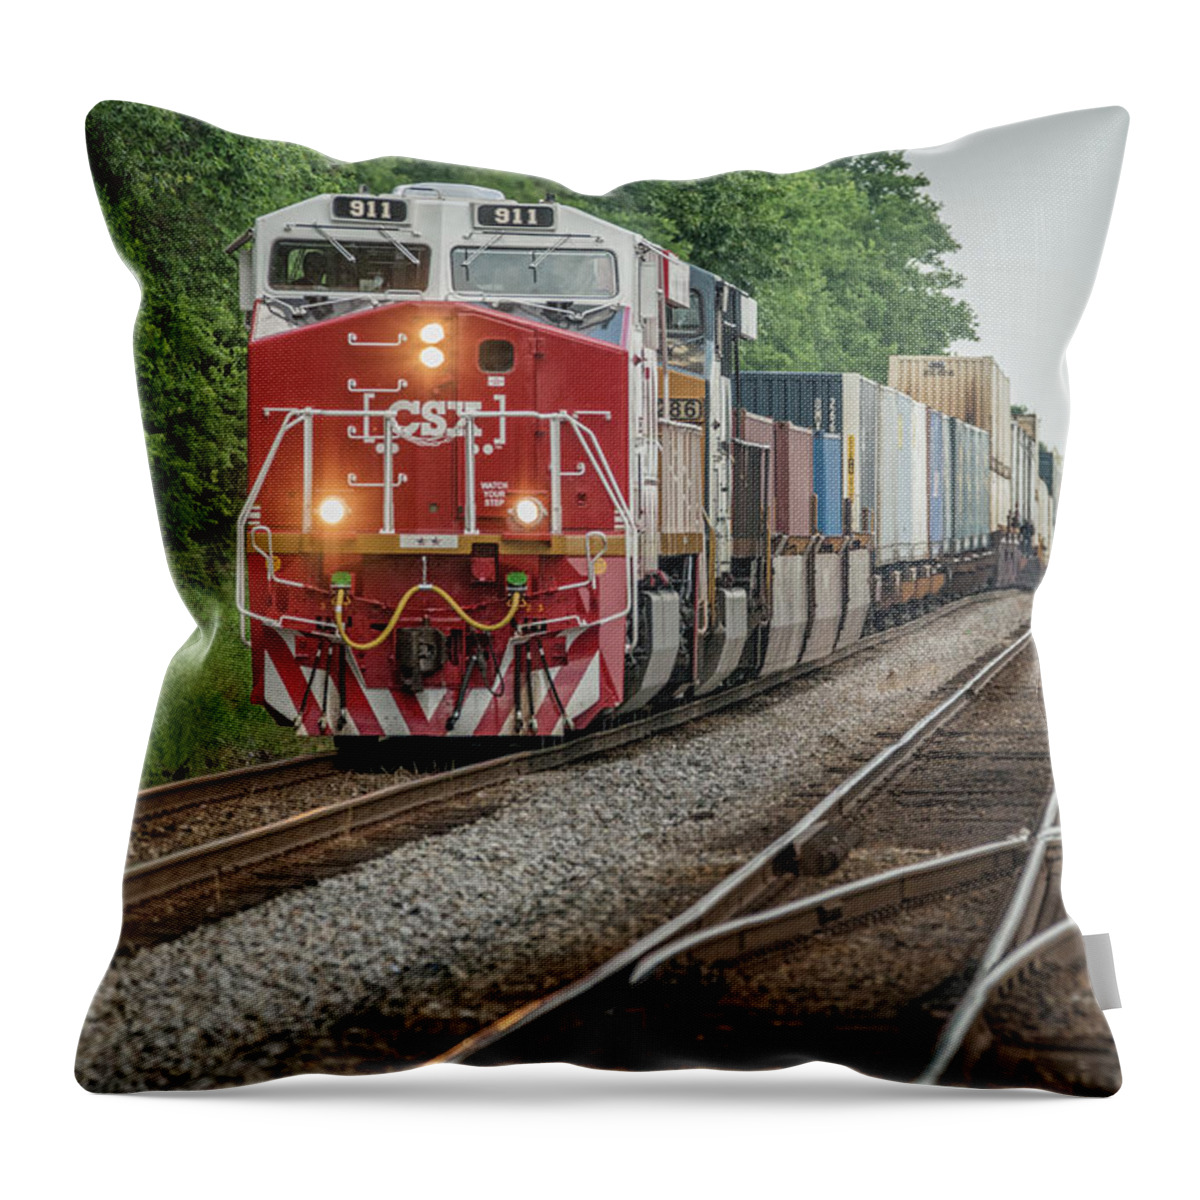 Railroad Throw Pillow featuring the photograph CSXT 911 at Casky Lane Hopkinsville Ky by Jim Pearson